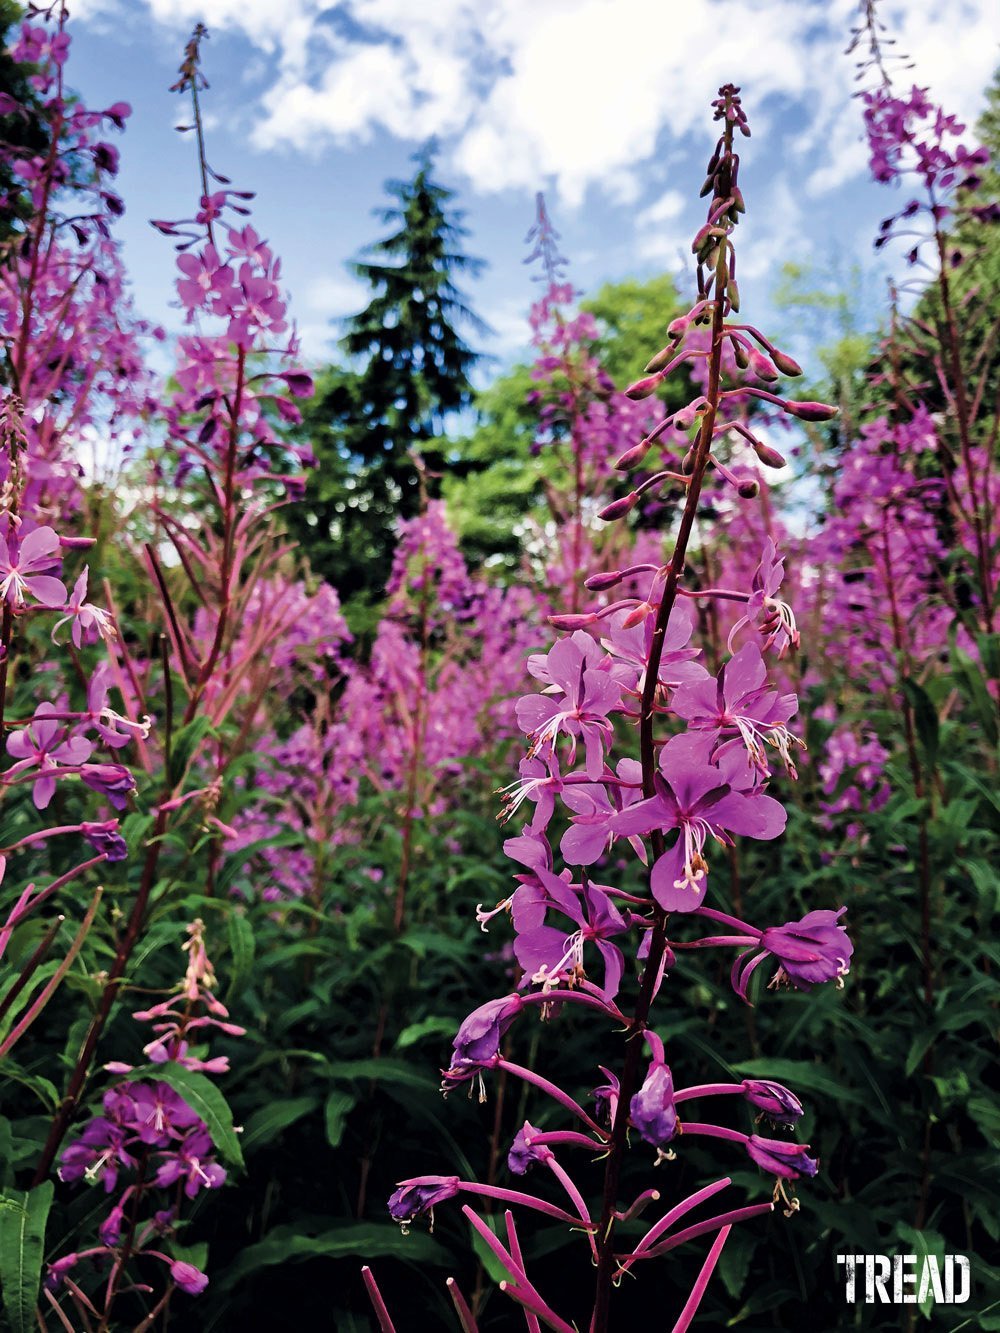 Fireweed leaves are edible and can be combined with flowers to make tea